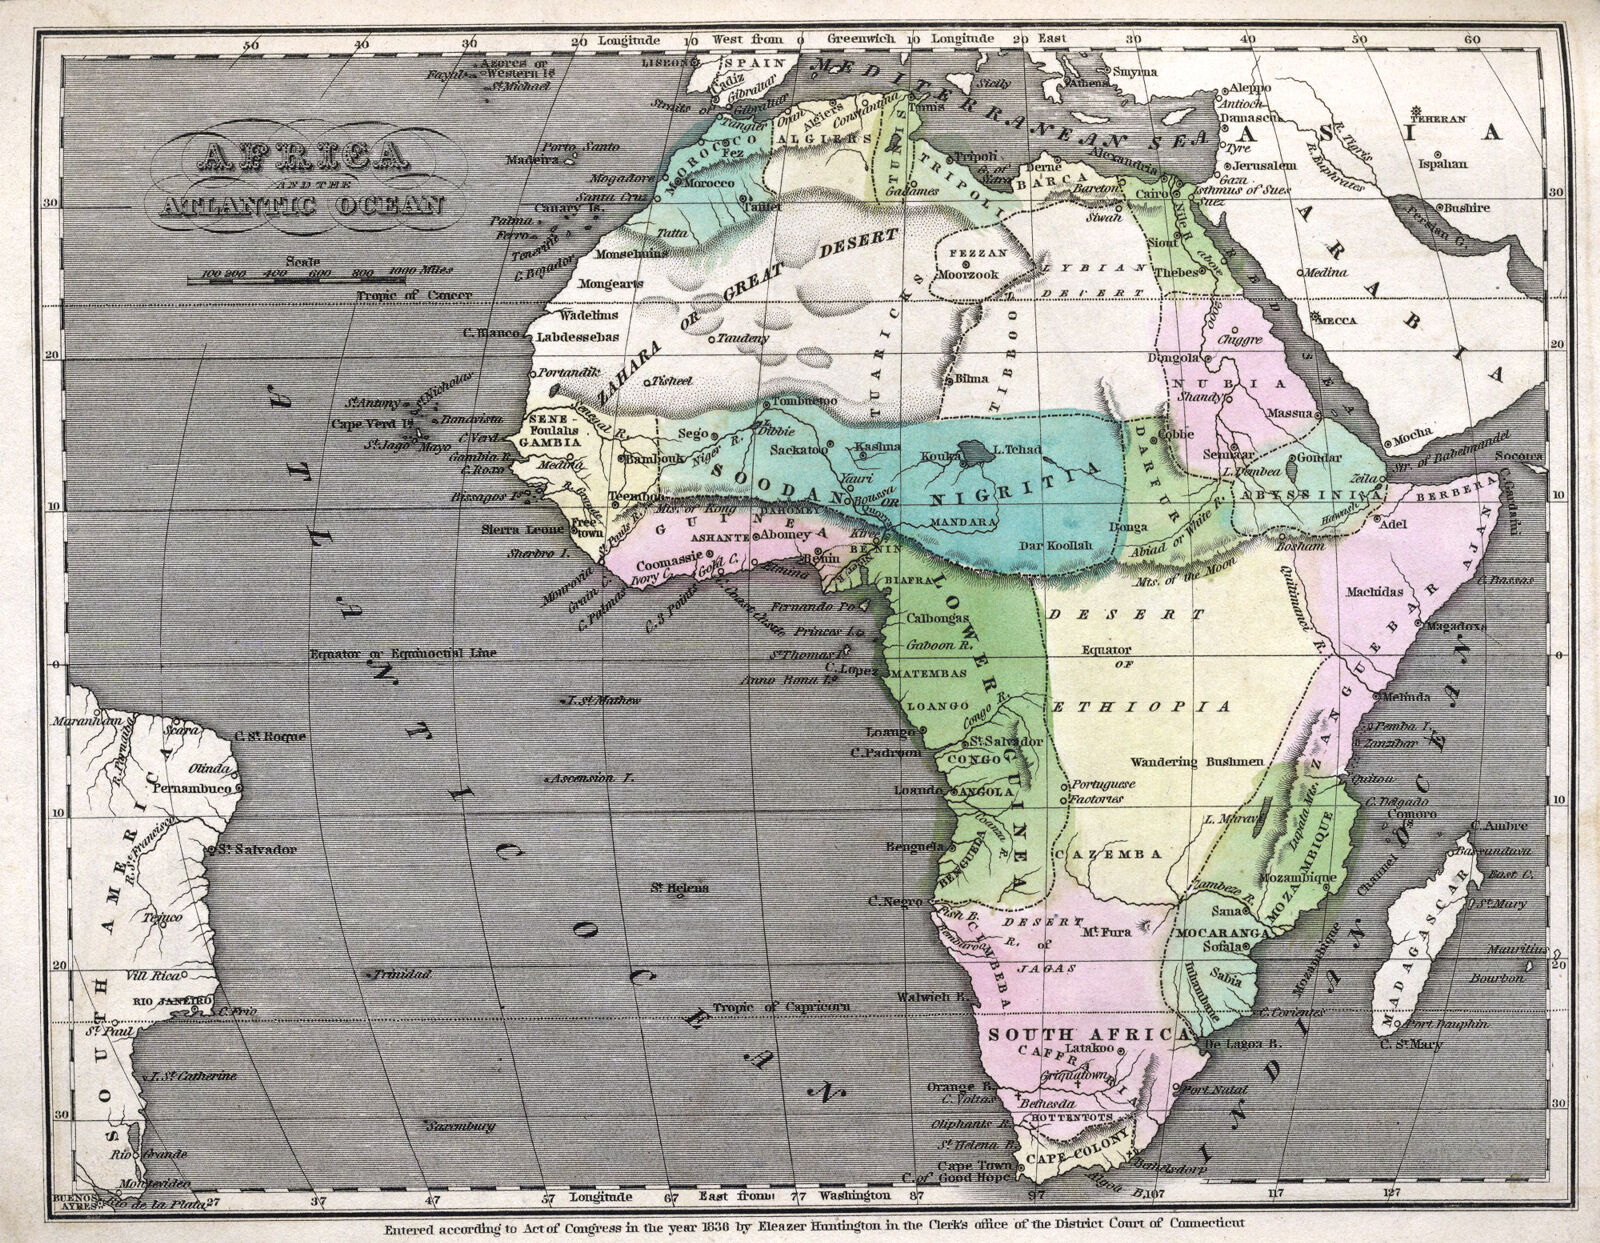 Africa and the Atlantic Ocean | Digital Collections at the University